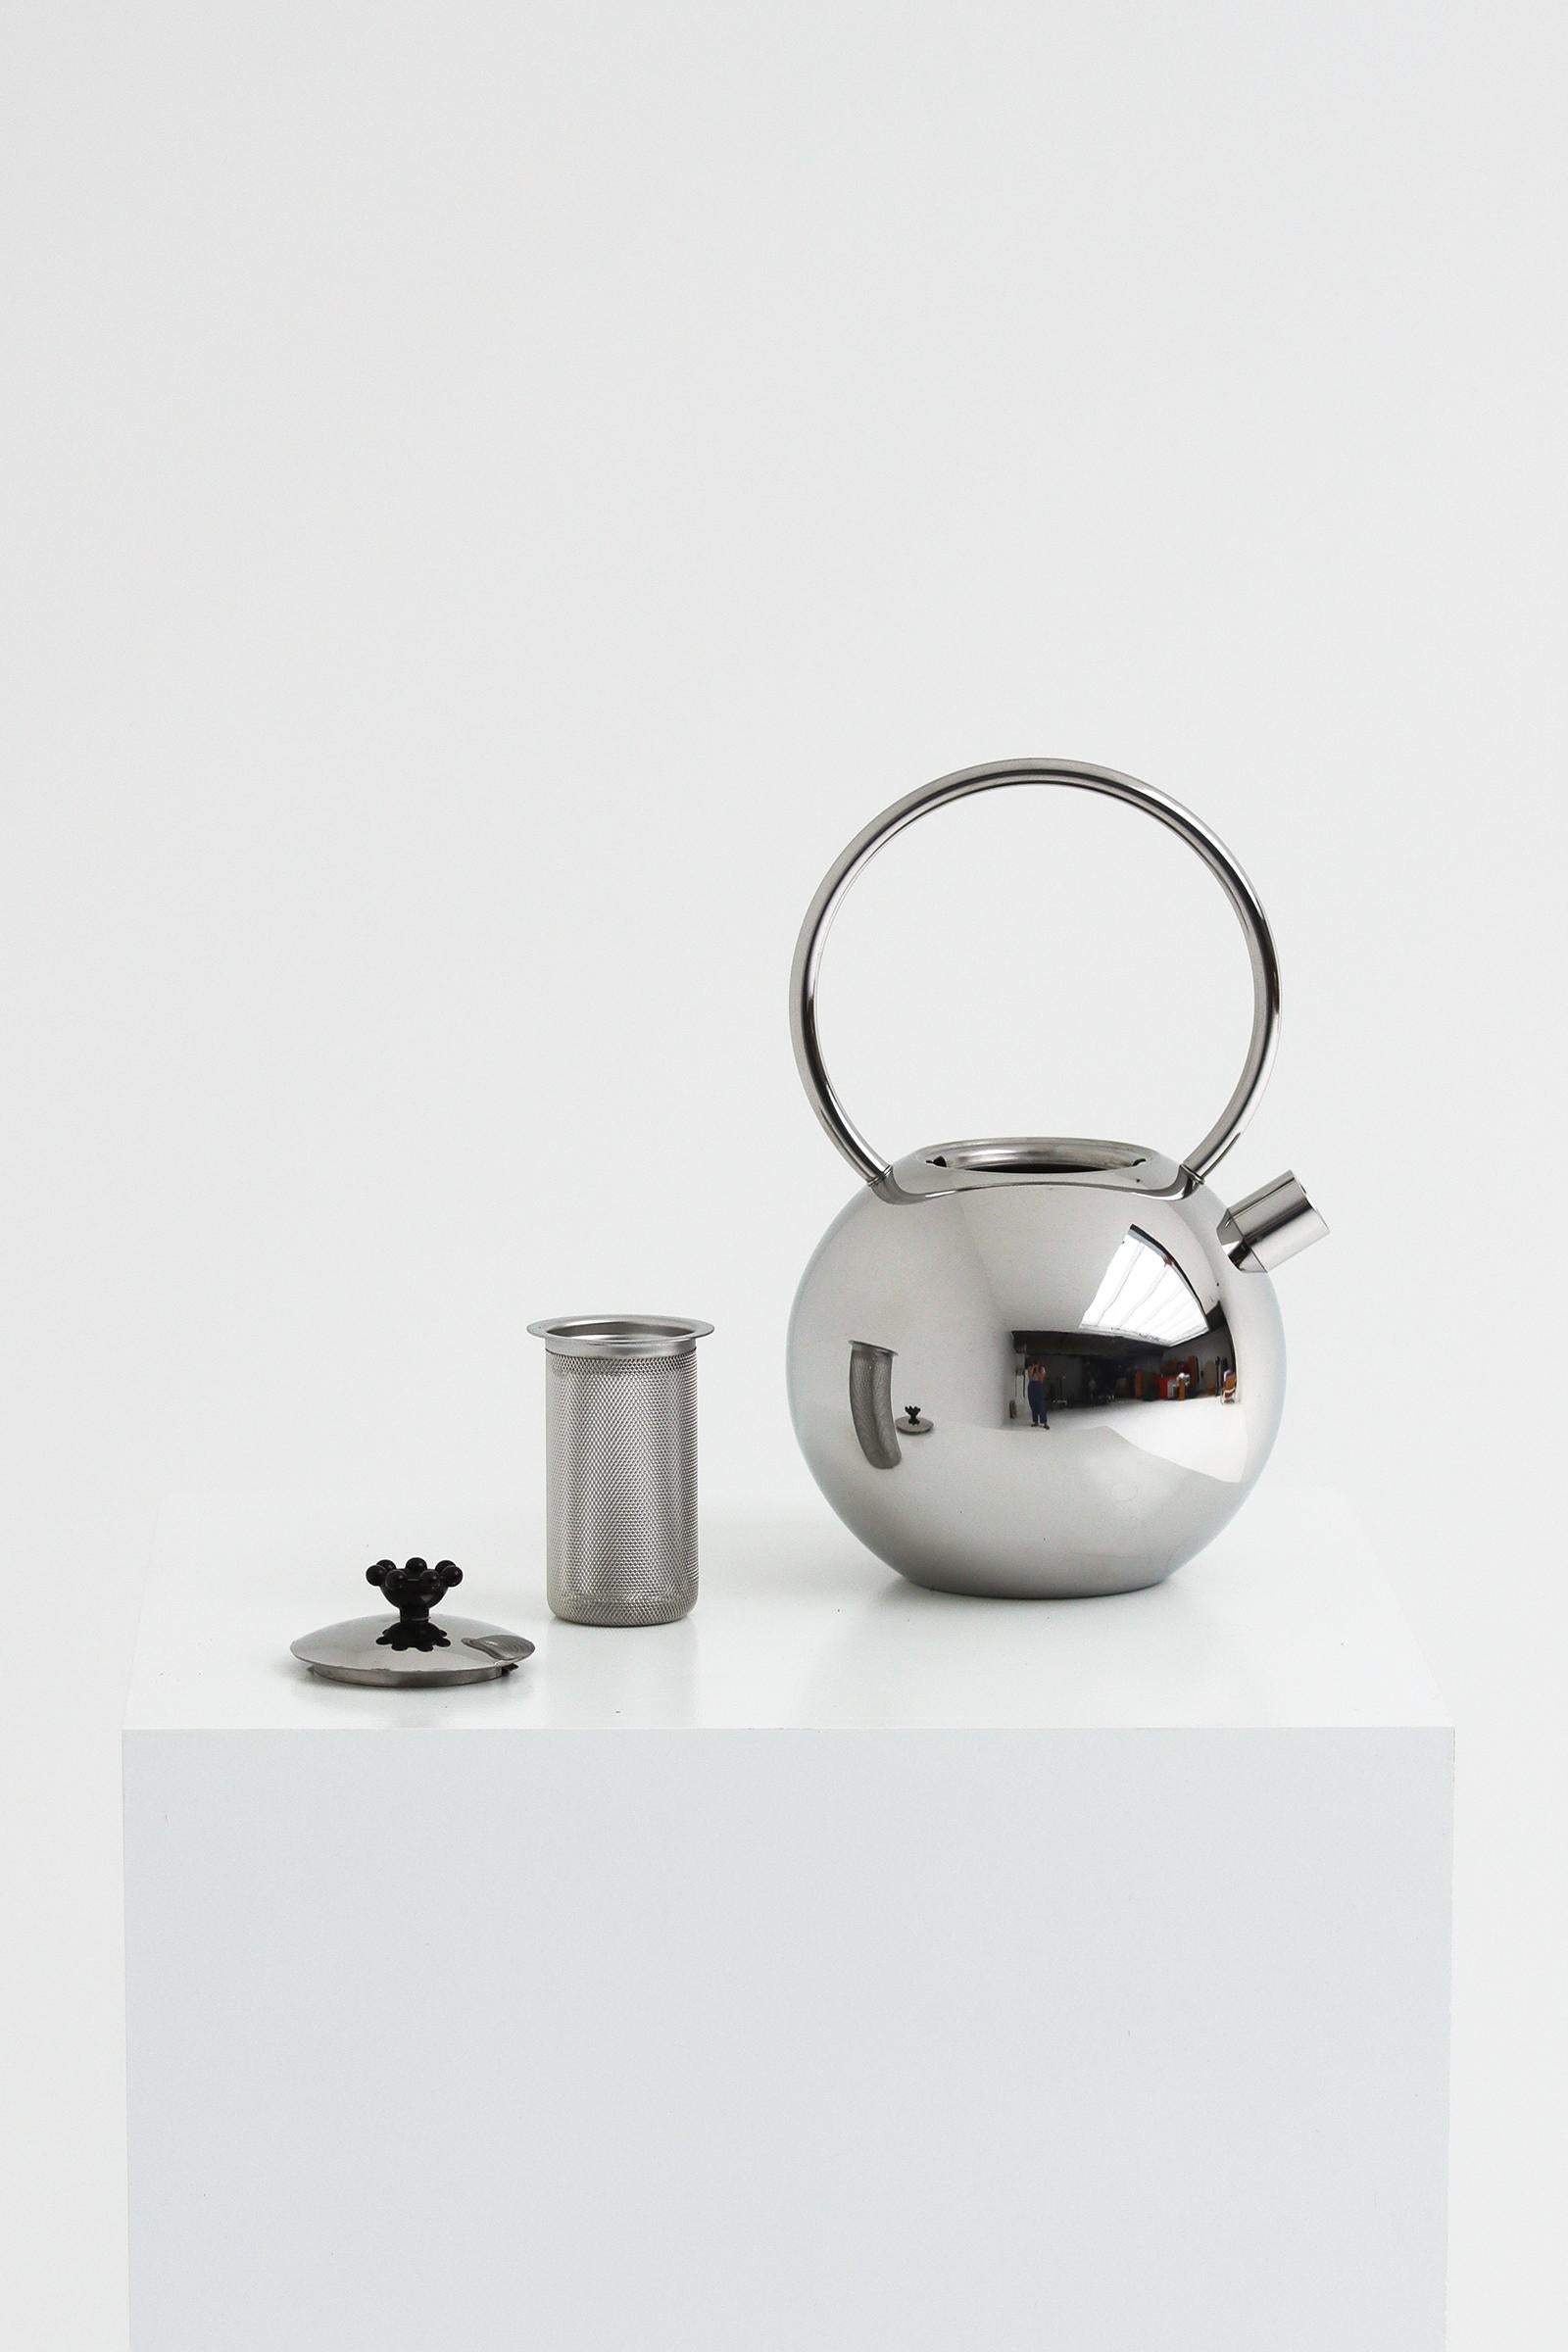 Late 20th Century Midcentury modern chrome Teapot from the King Series of Wmf by Matteo Thun 1989 For Sale